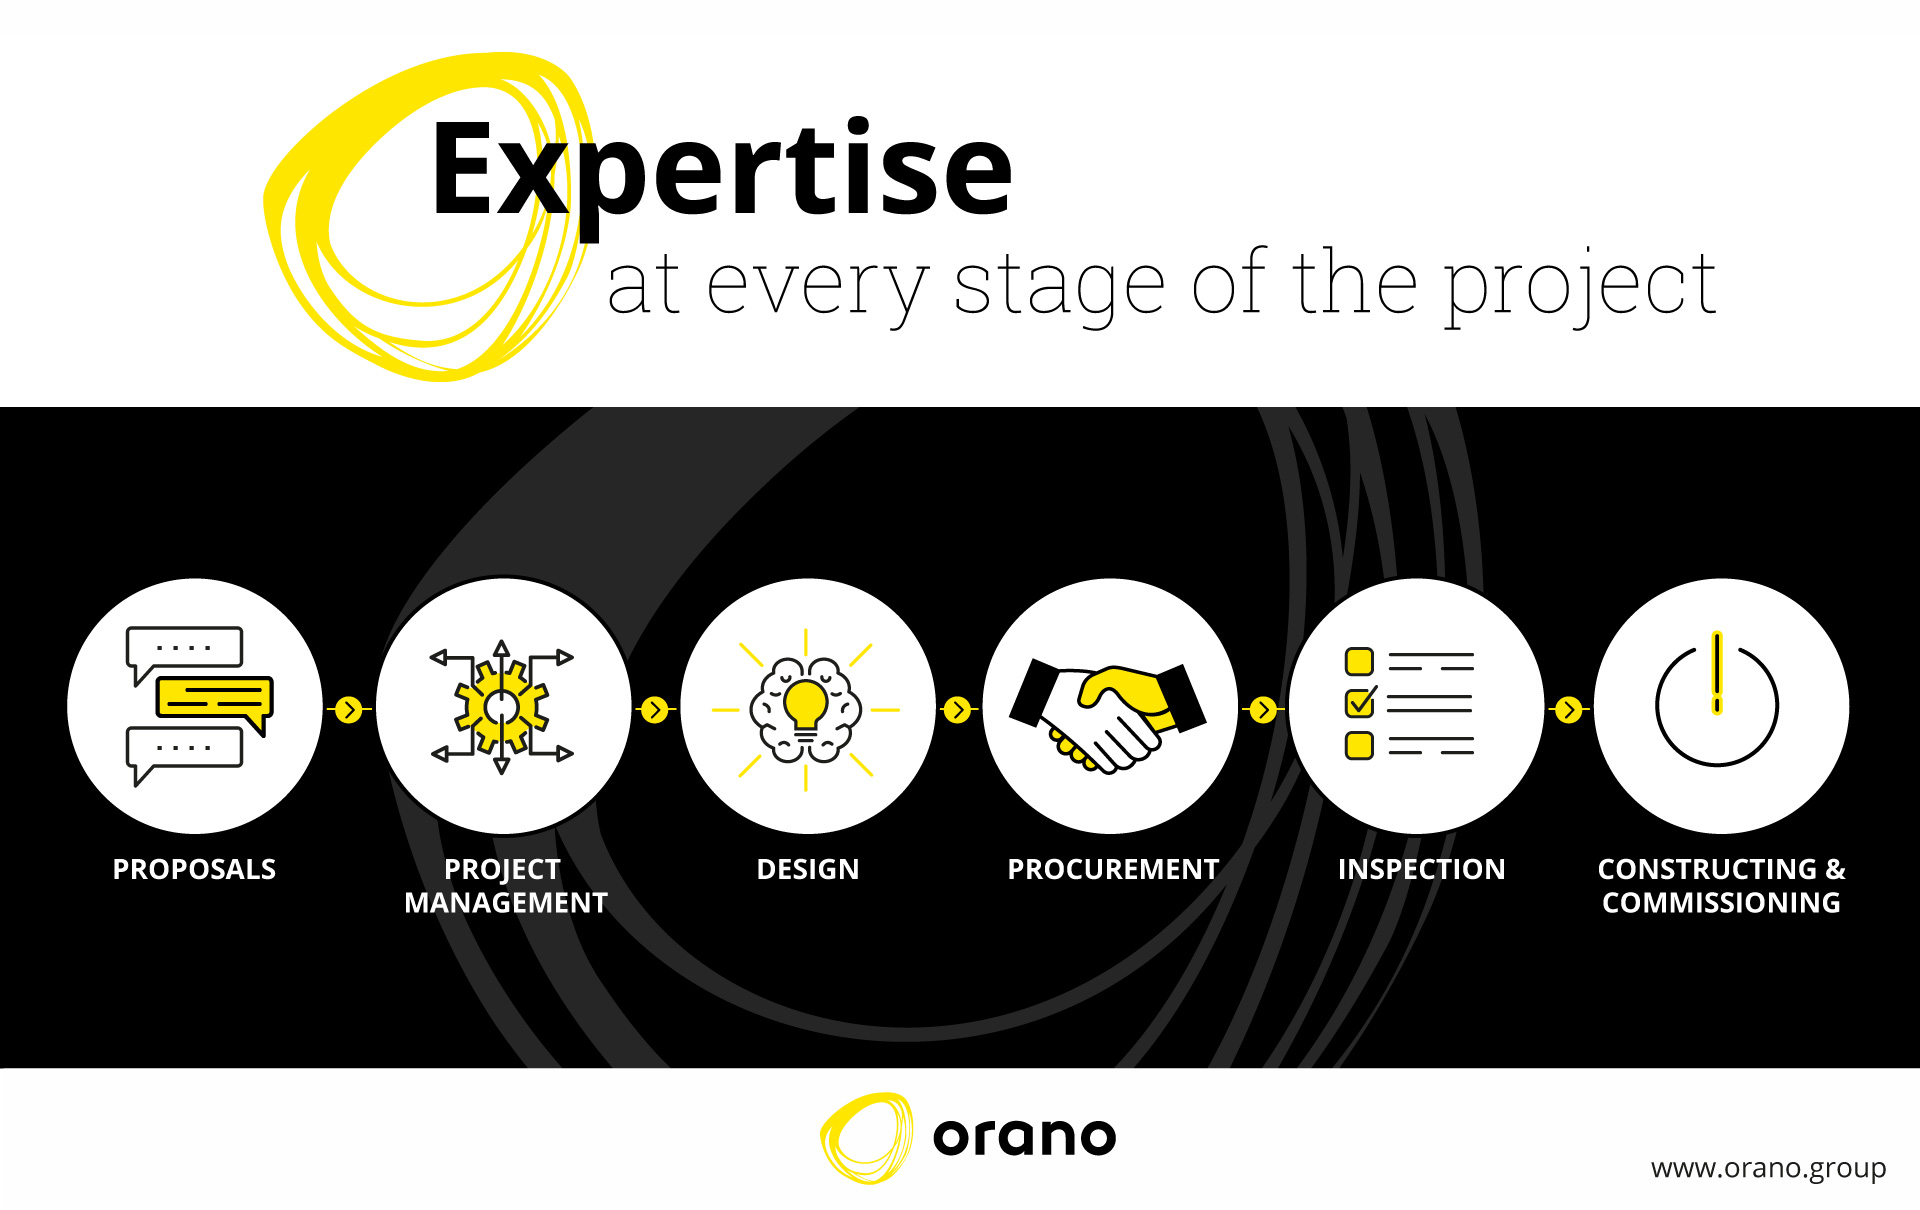 Orano Projects’ services range from support engineering for operators to comprehensive EPCM (Engineering, Procurement, Construction, Management) responsibilities